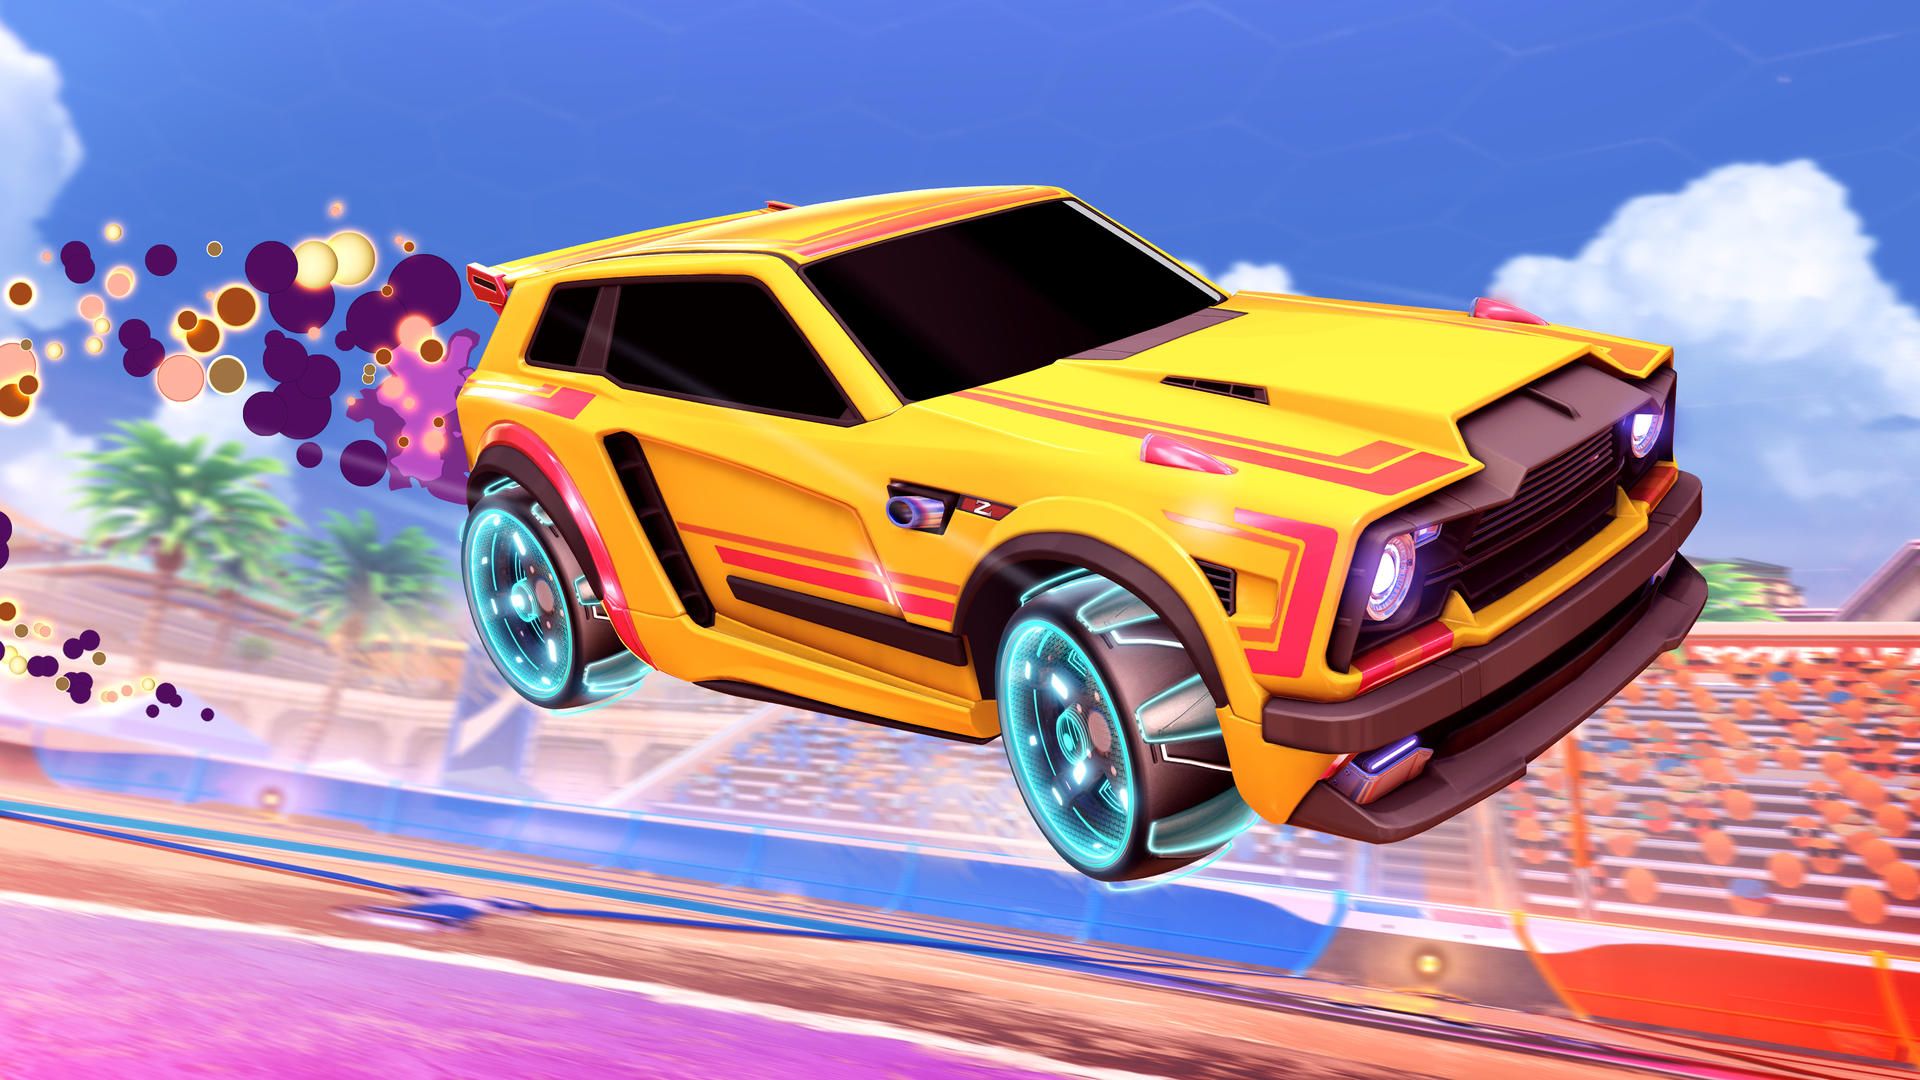 Rocket League What EVERY Car Looks Like (Including Crossover DLC)